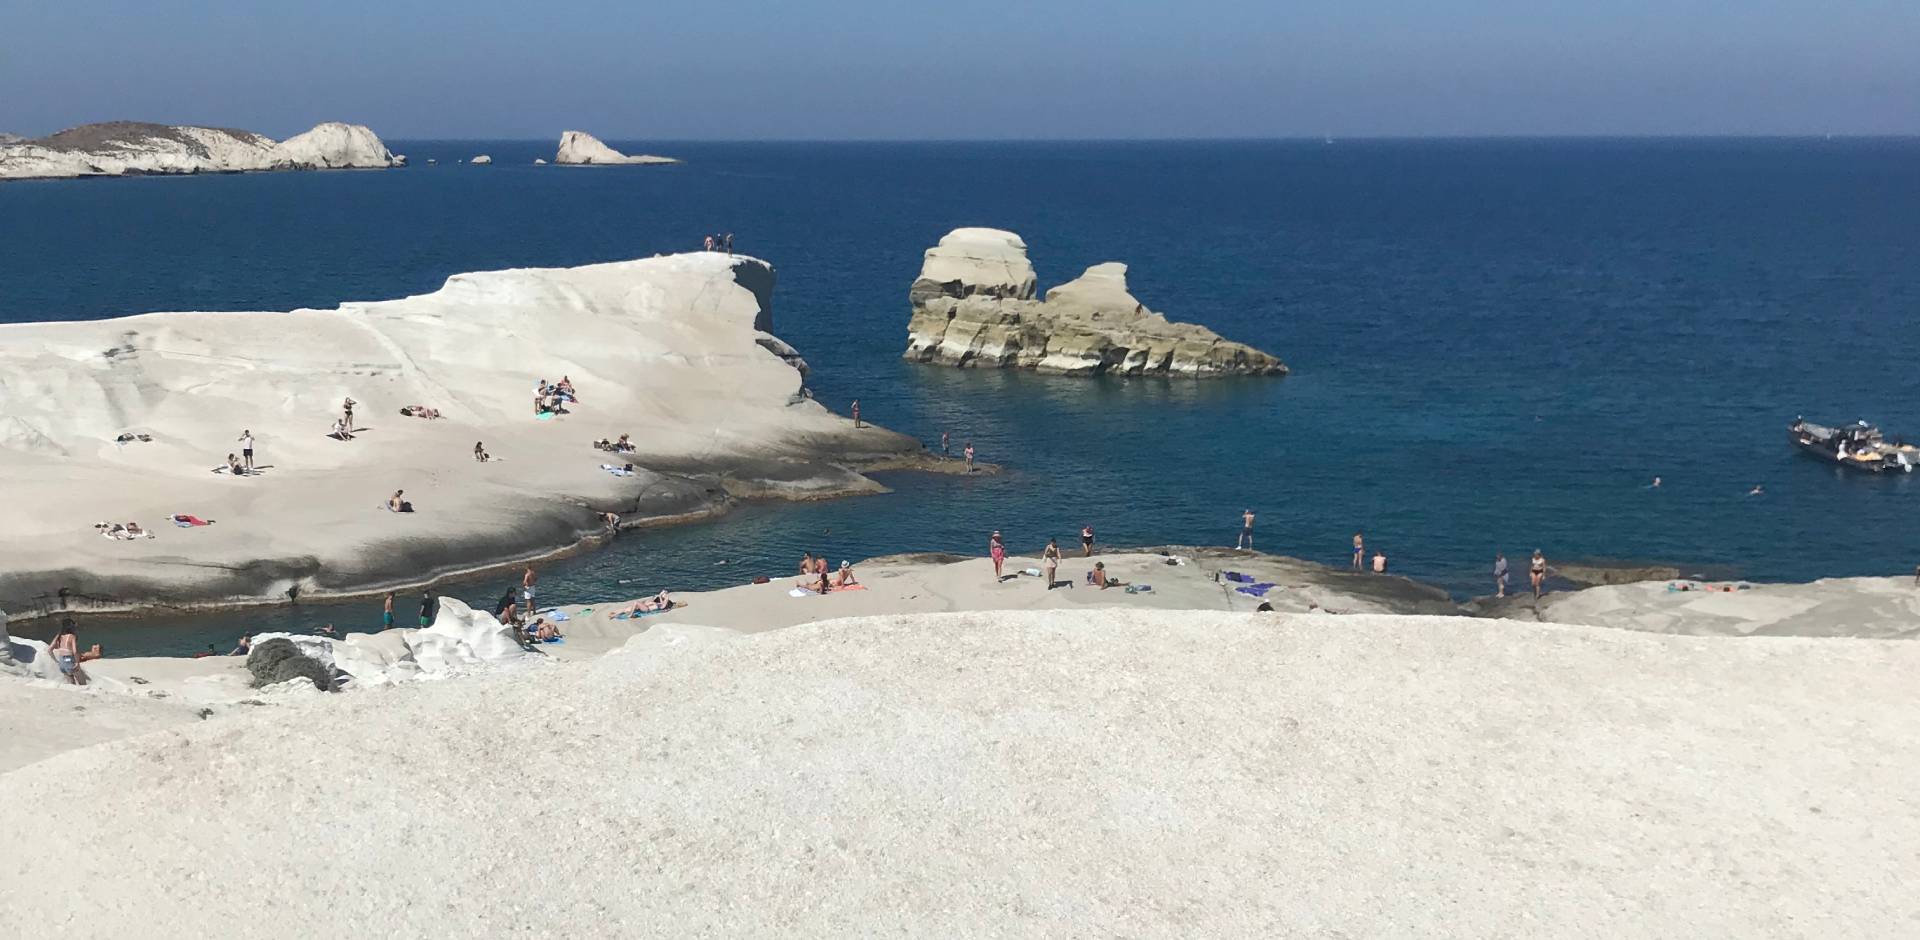 Milos Travel Guide: Our Island Guide & Best Places to Visit